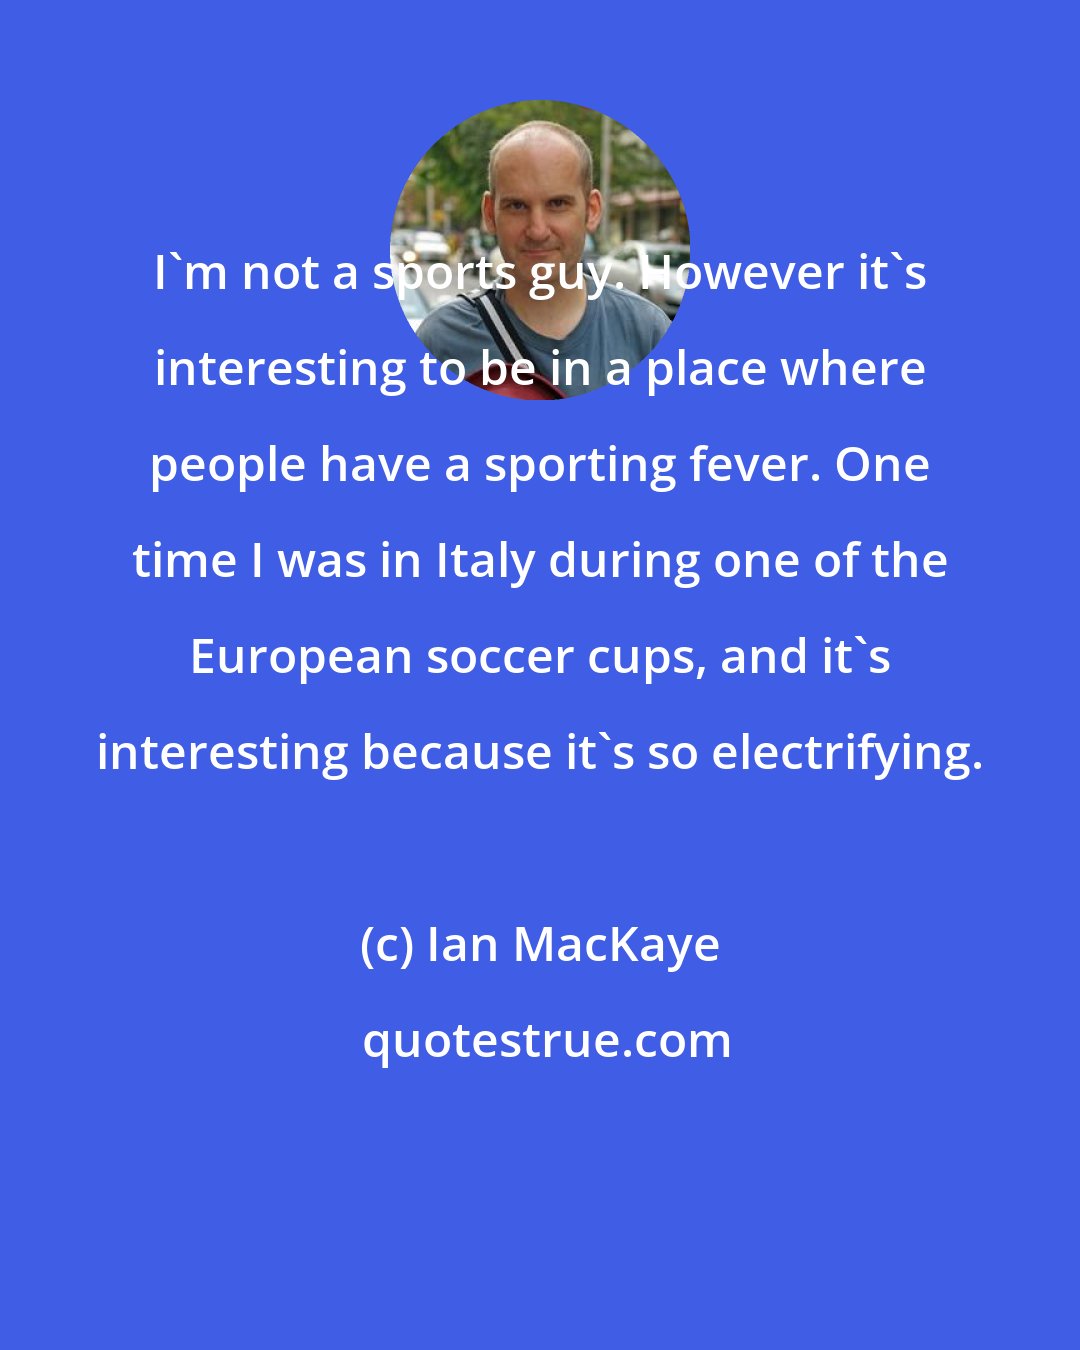 Ian MacKaye: I'm not a sports guy. However it's interesting to be in a place where people have a sporting fever. One time I was in Italy during one of the European soccer cups, and it's interesting because it's so electrifying.